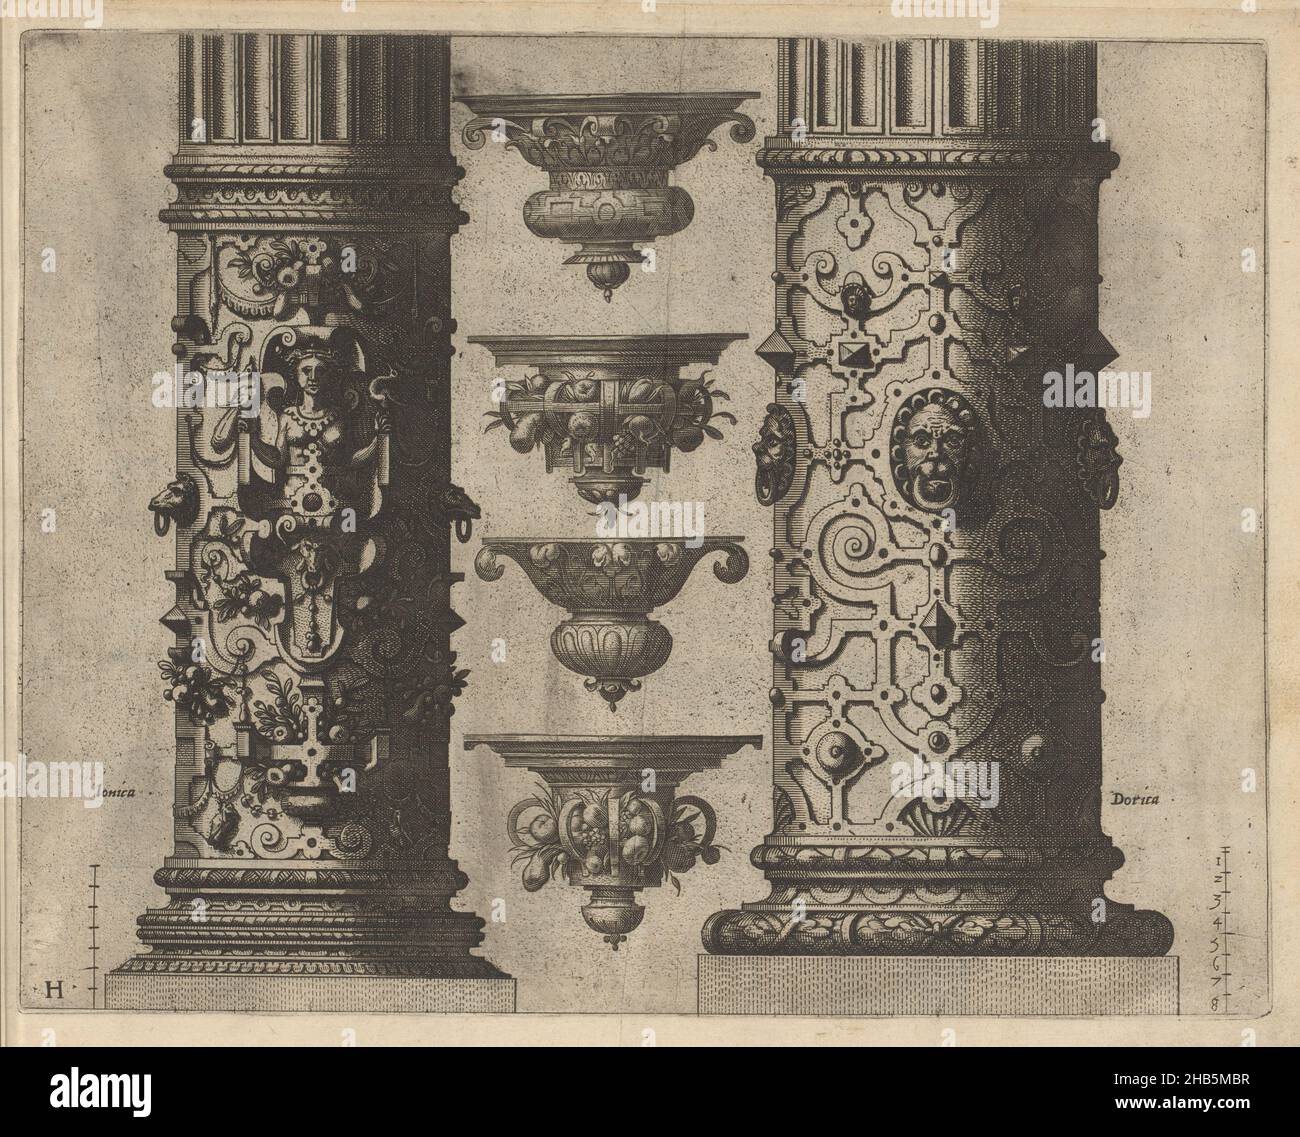 Two 'columnae caelatae' and four consoles, Den eersten boeck ghemaeckt op de twee Colomnen Dorica en Ionica (series title), On the left the lower half of a column of the Ionic Order with a female hermit, caught in scrollwork. On the right, the lower half of a Doric column with hardware and mascarons. In between, four consoles. The print has two indications of scale. Sheet H. The print is part of an album., print maker: Johannes of Lucas van Doetechum, Hans Vredeman de Vries, Antwerp, 1565, paper, etching, height 235 mm × width 300 mm Stock Photo